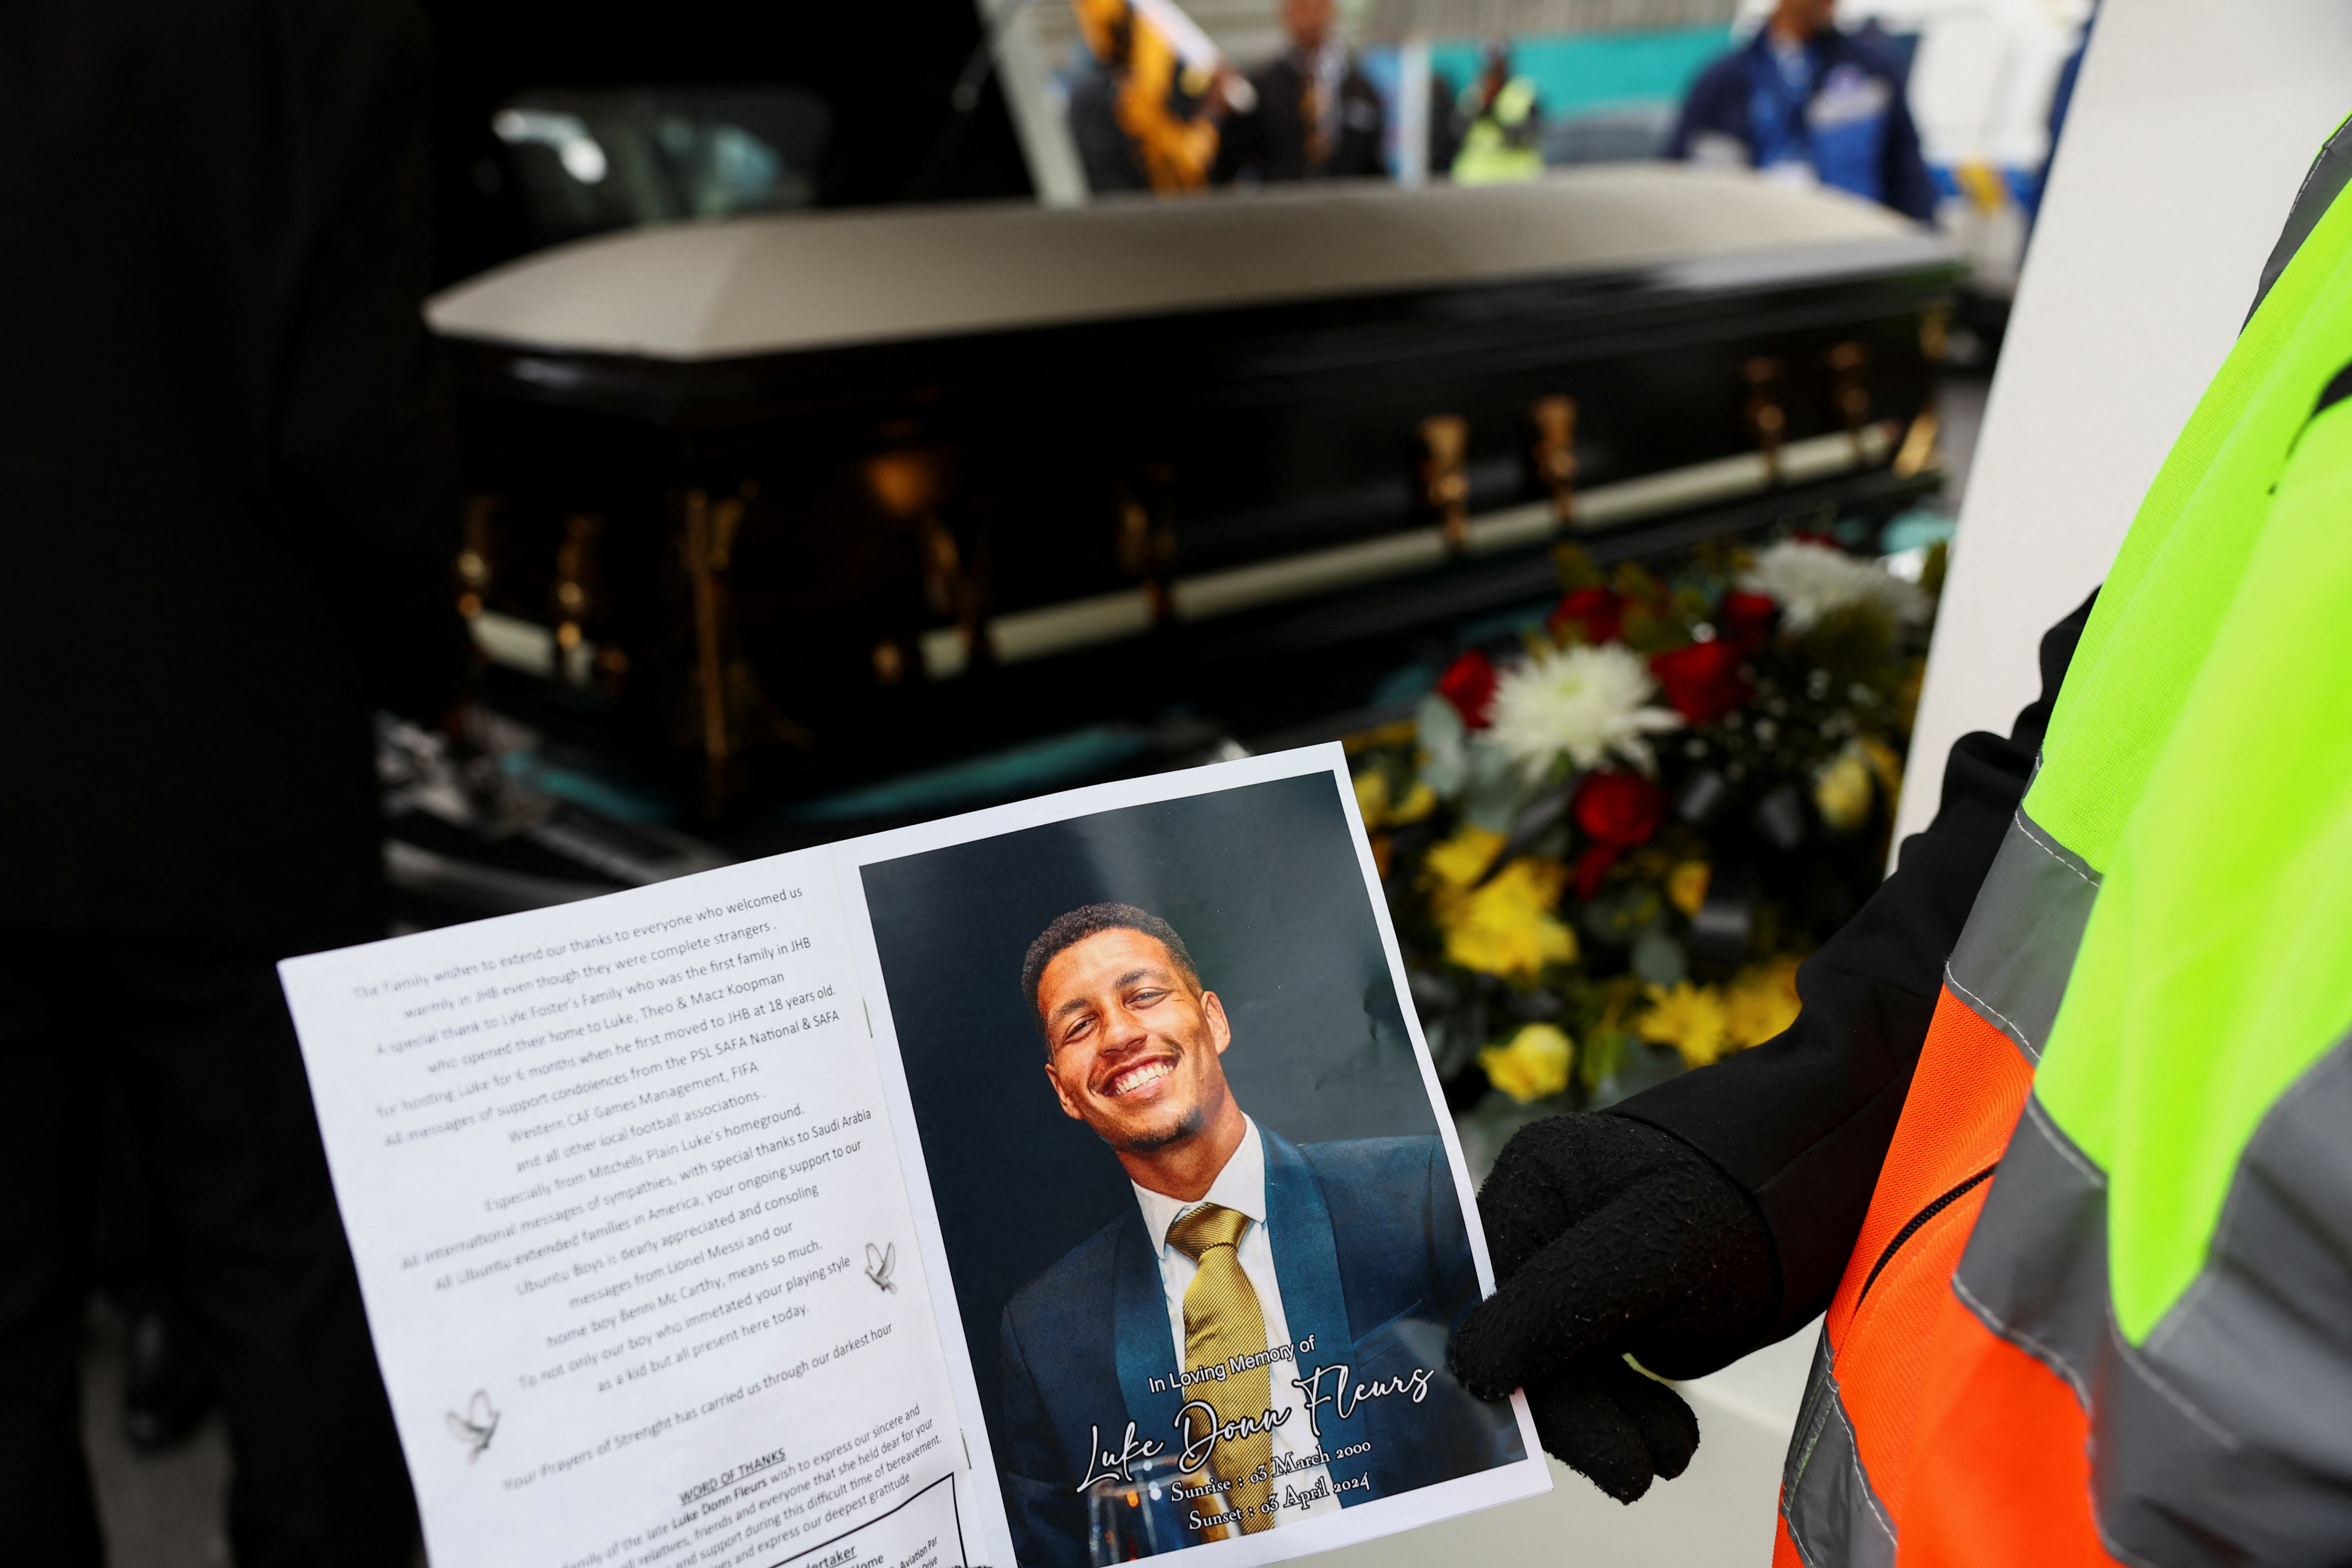 Sportsman's murder highlights South Africa's crime problem as election nears